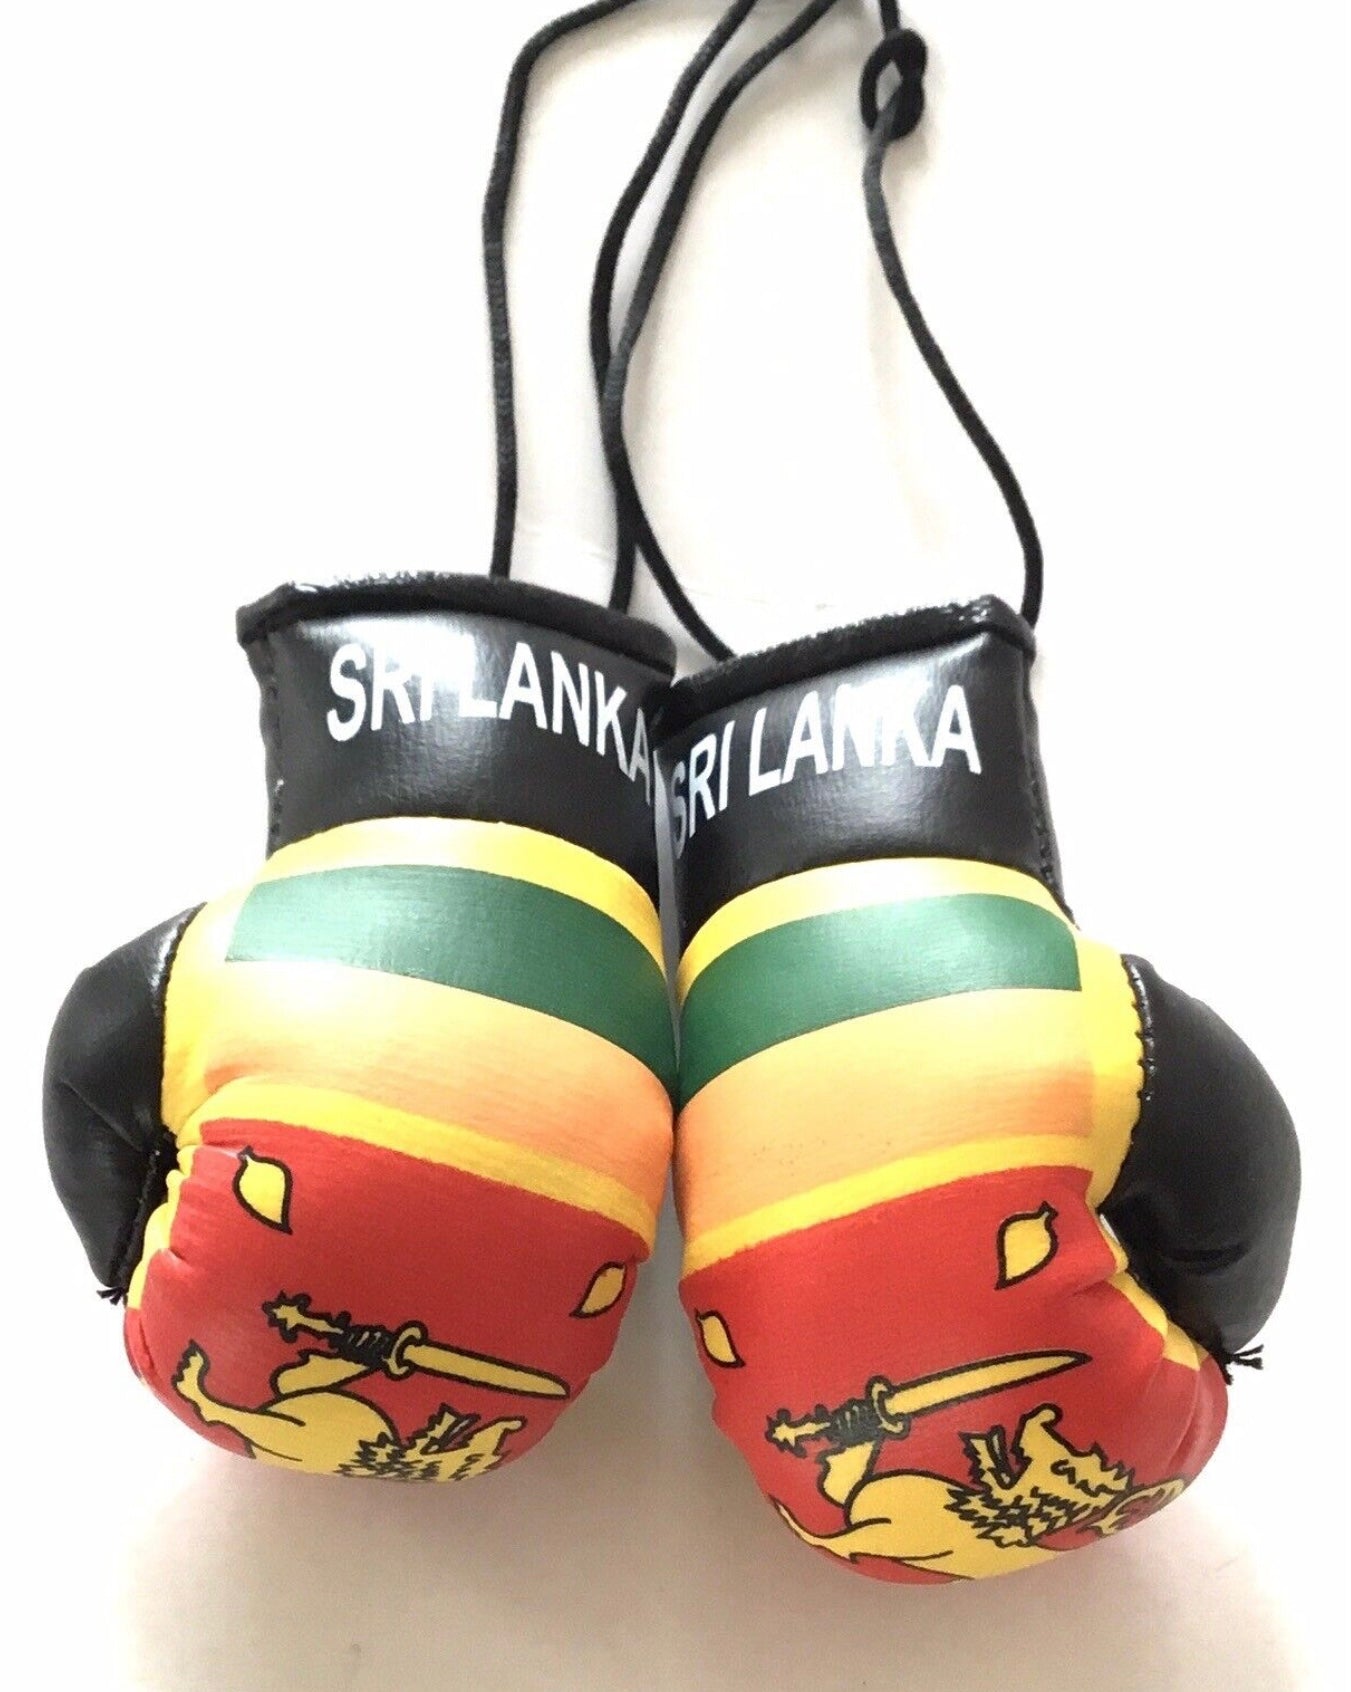 SRI LANKA PAIR OF BOXING GLOVES FOR HANGING IN THE CAR OR OFFICE 9 X 5cm